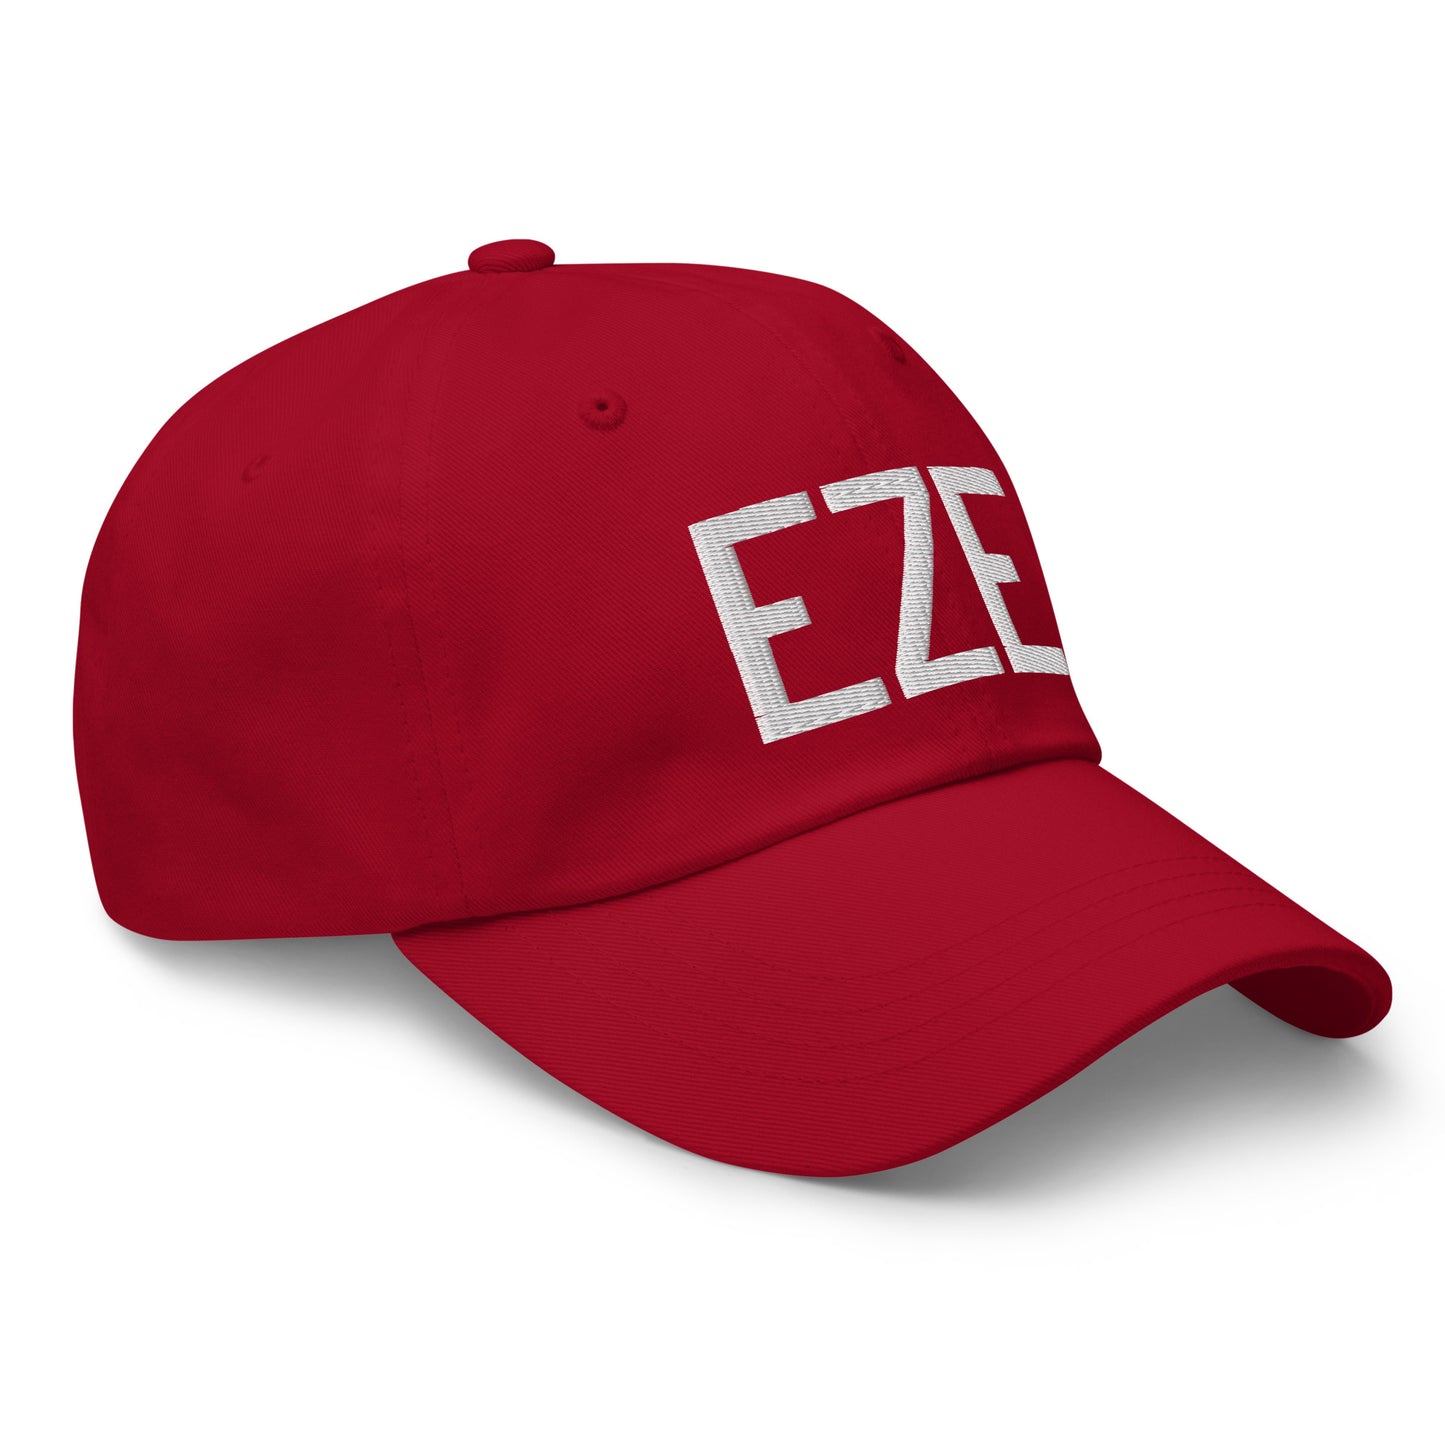 Airport Code Baseball Cap - White • EZE Buenos Aires • YHM Designs - Image 20